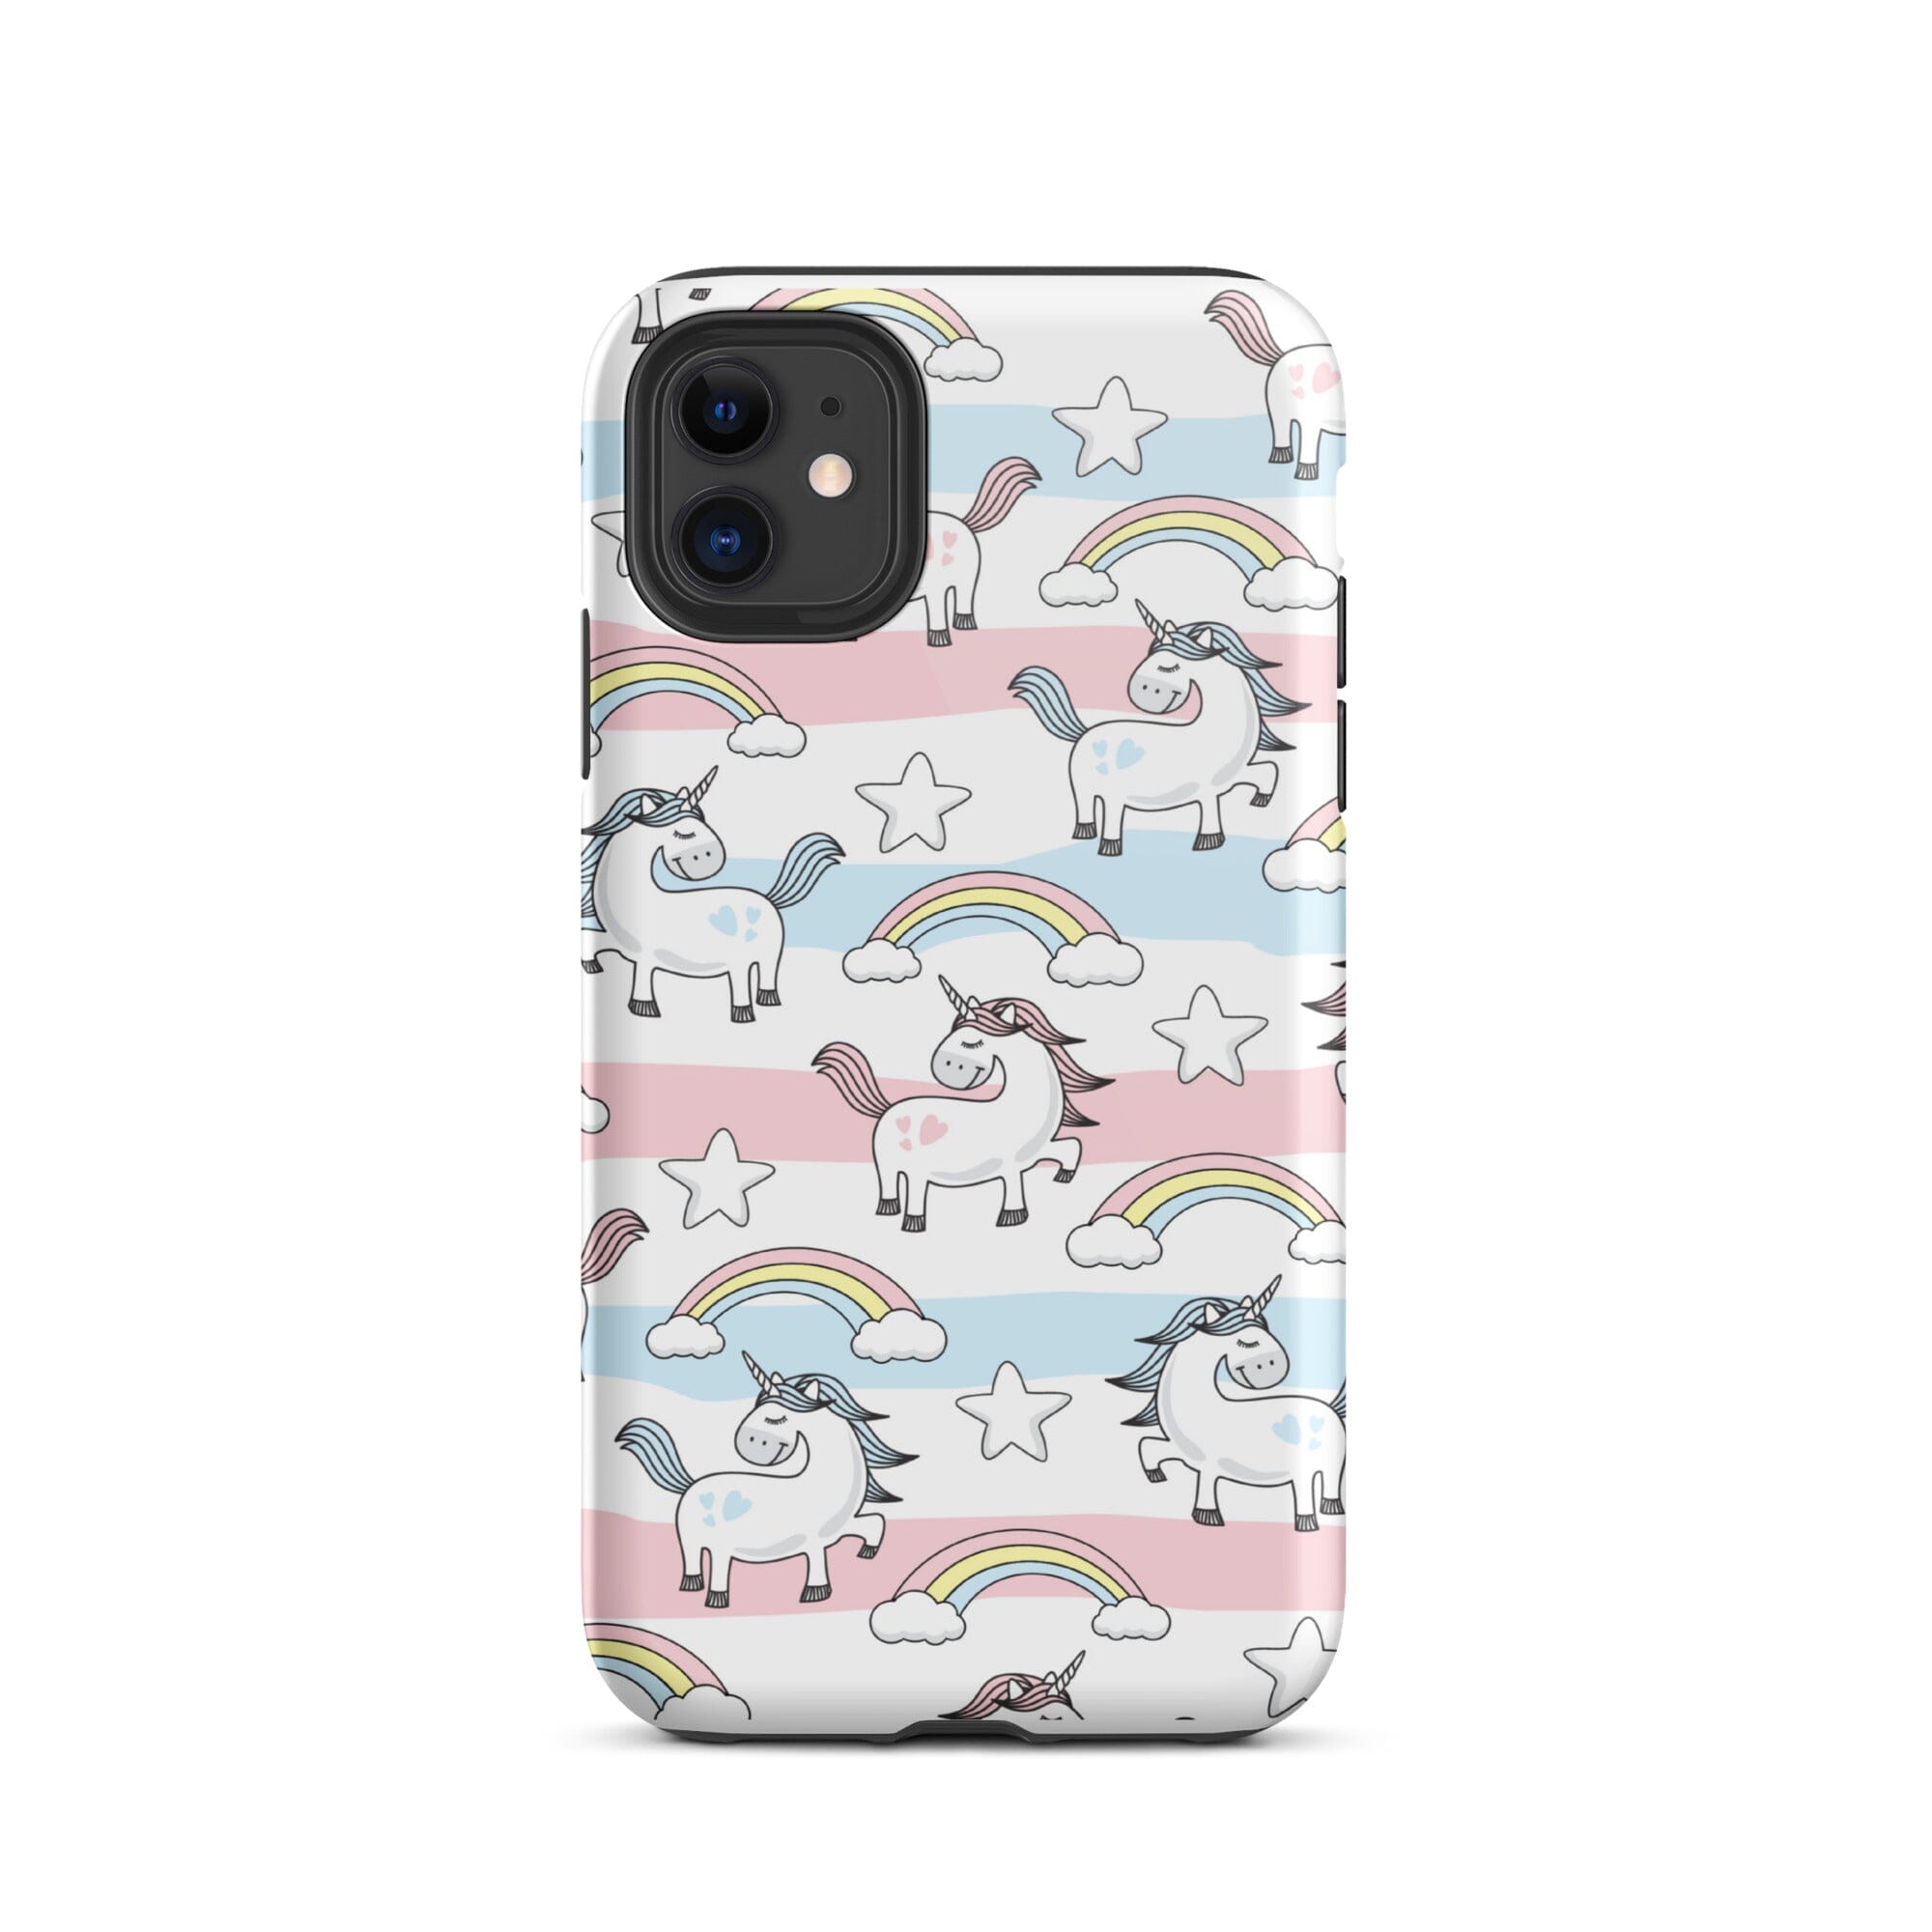 Unicorns Tough iPhone case Knitted Belle Boutique iPhone 11 